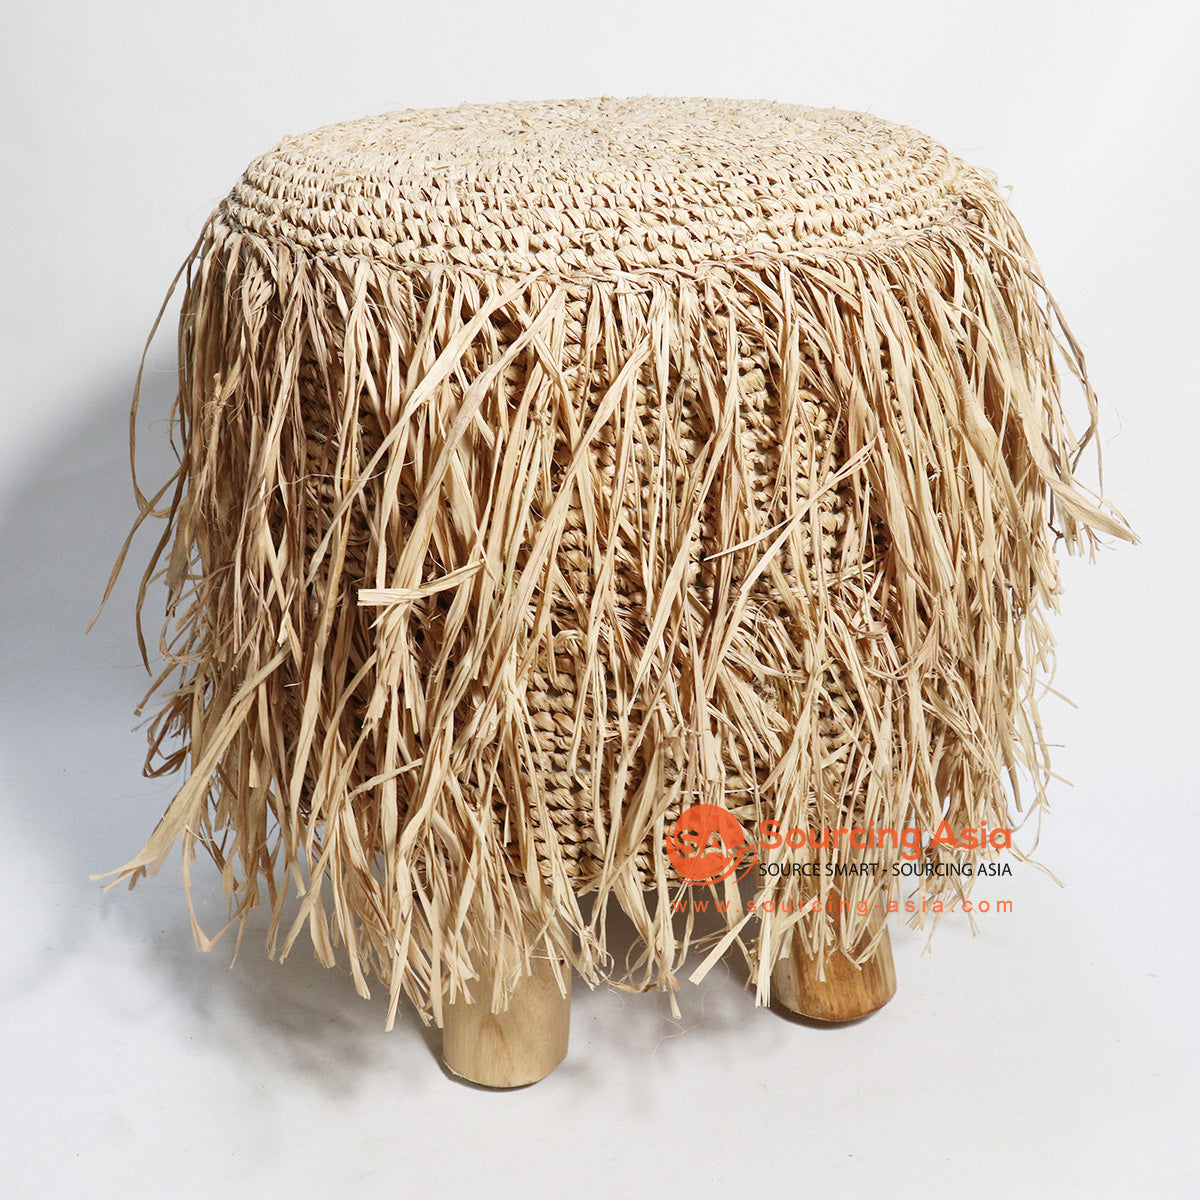 HBSC146 NATURAL RAFFIA FOOT STOOL WITH FRINGE